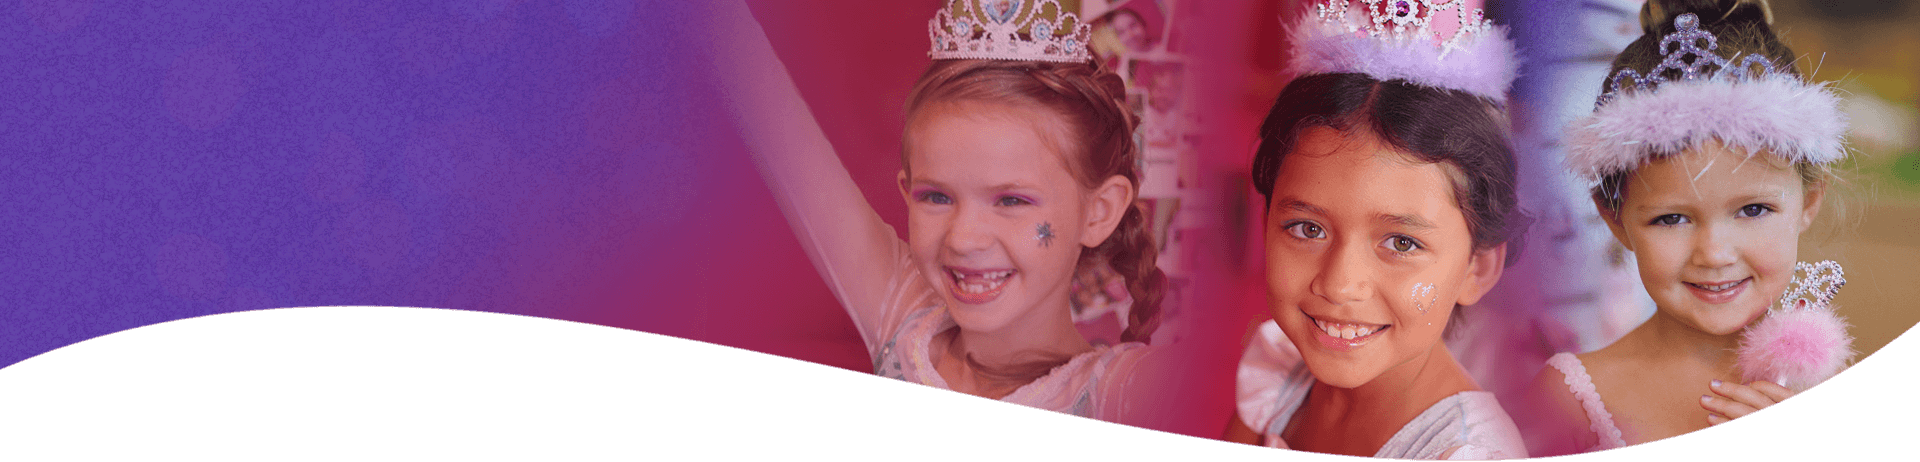 Little girls celebrating at Perfect Princess party at a salon for parties near you